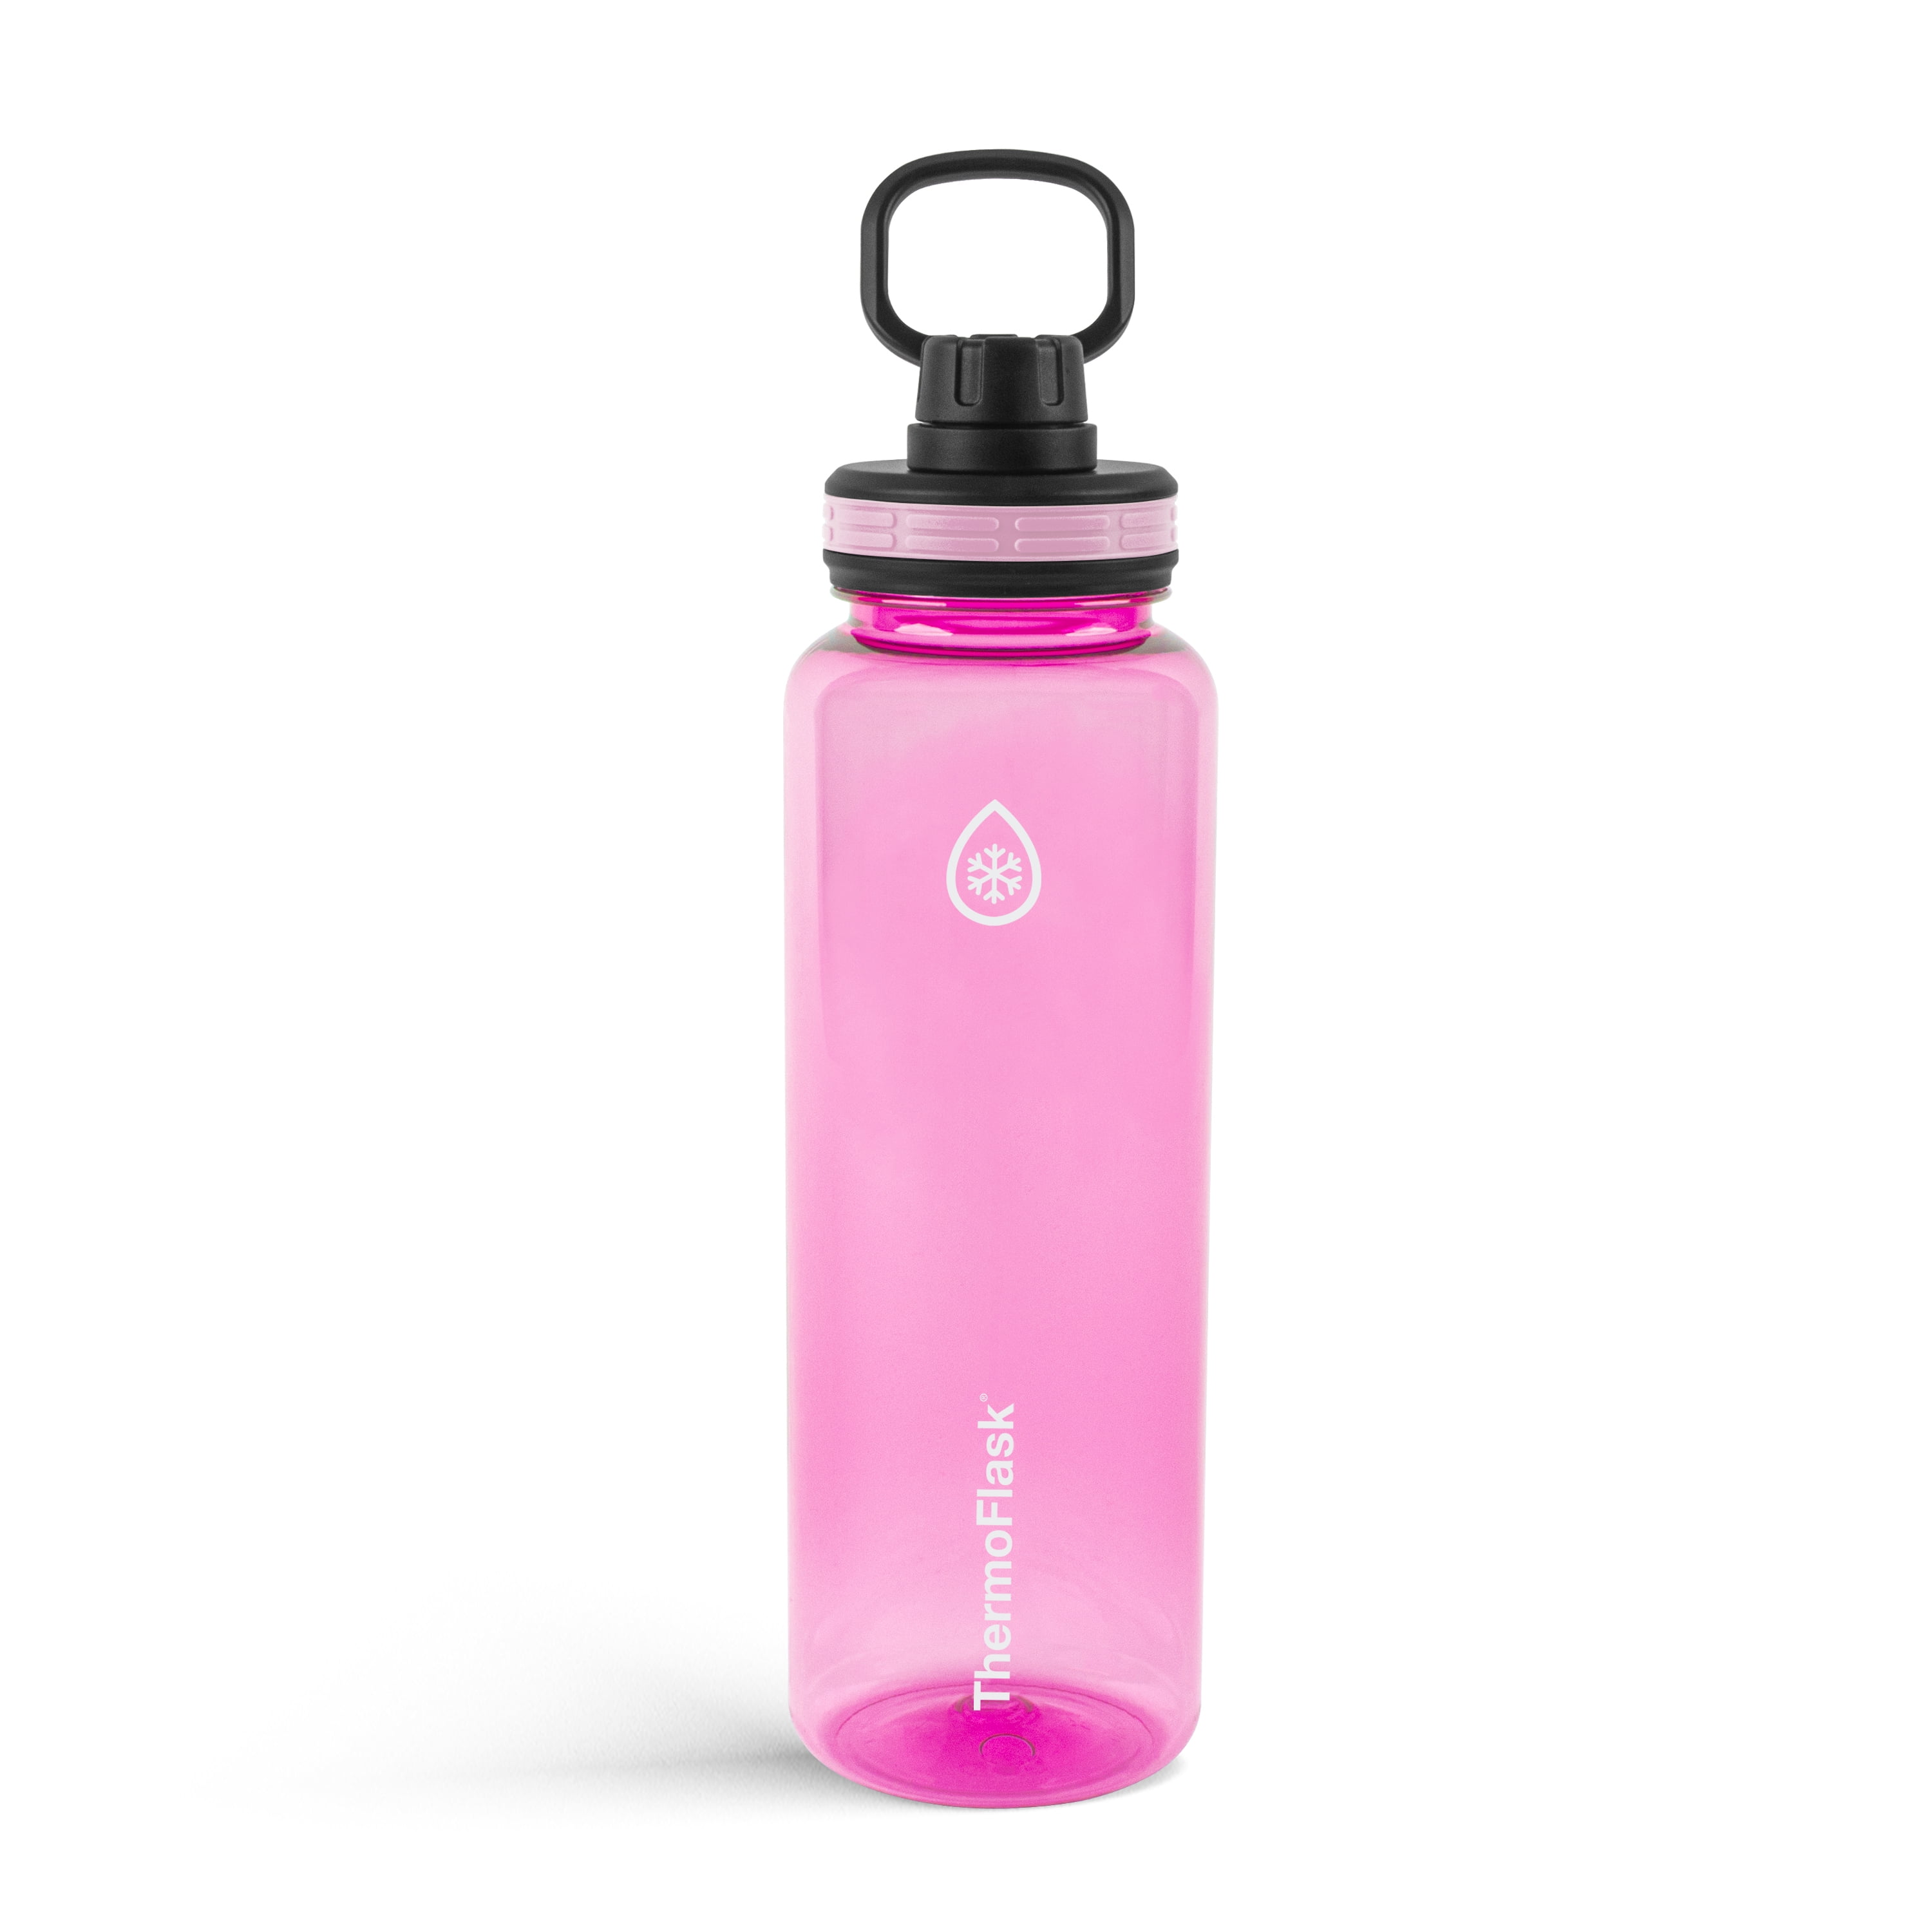 Thermoflask 40oz Stainless Steel Chug Water Bottle, Strawberry 